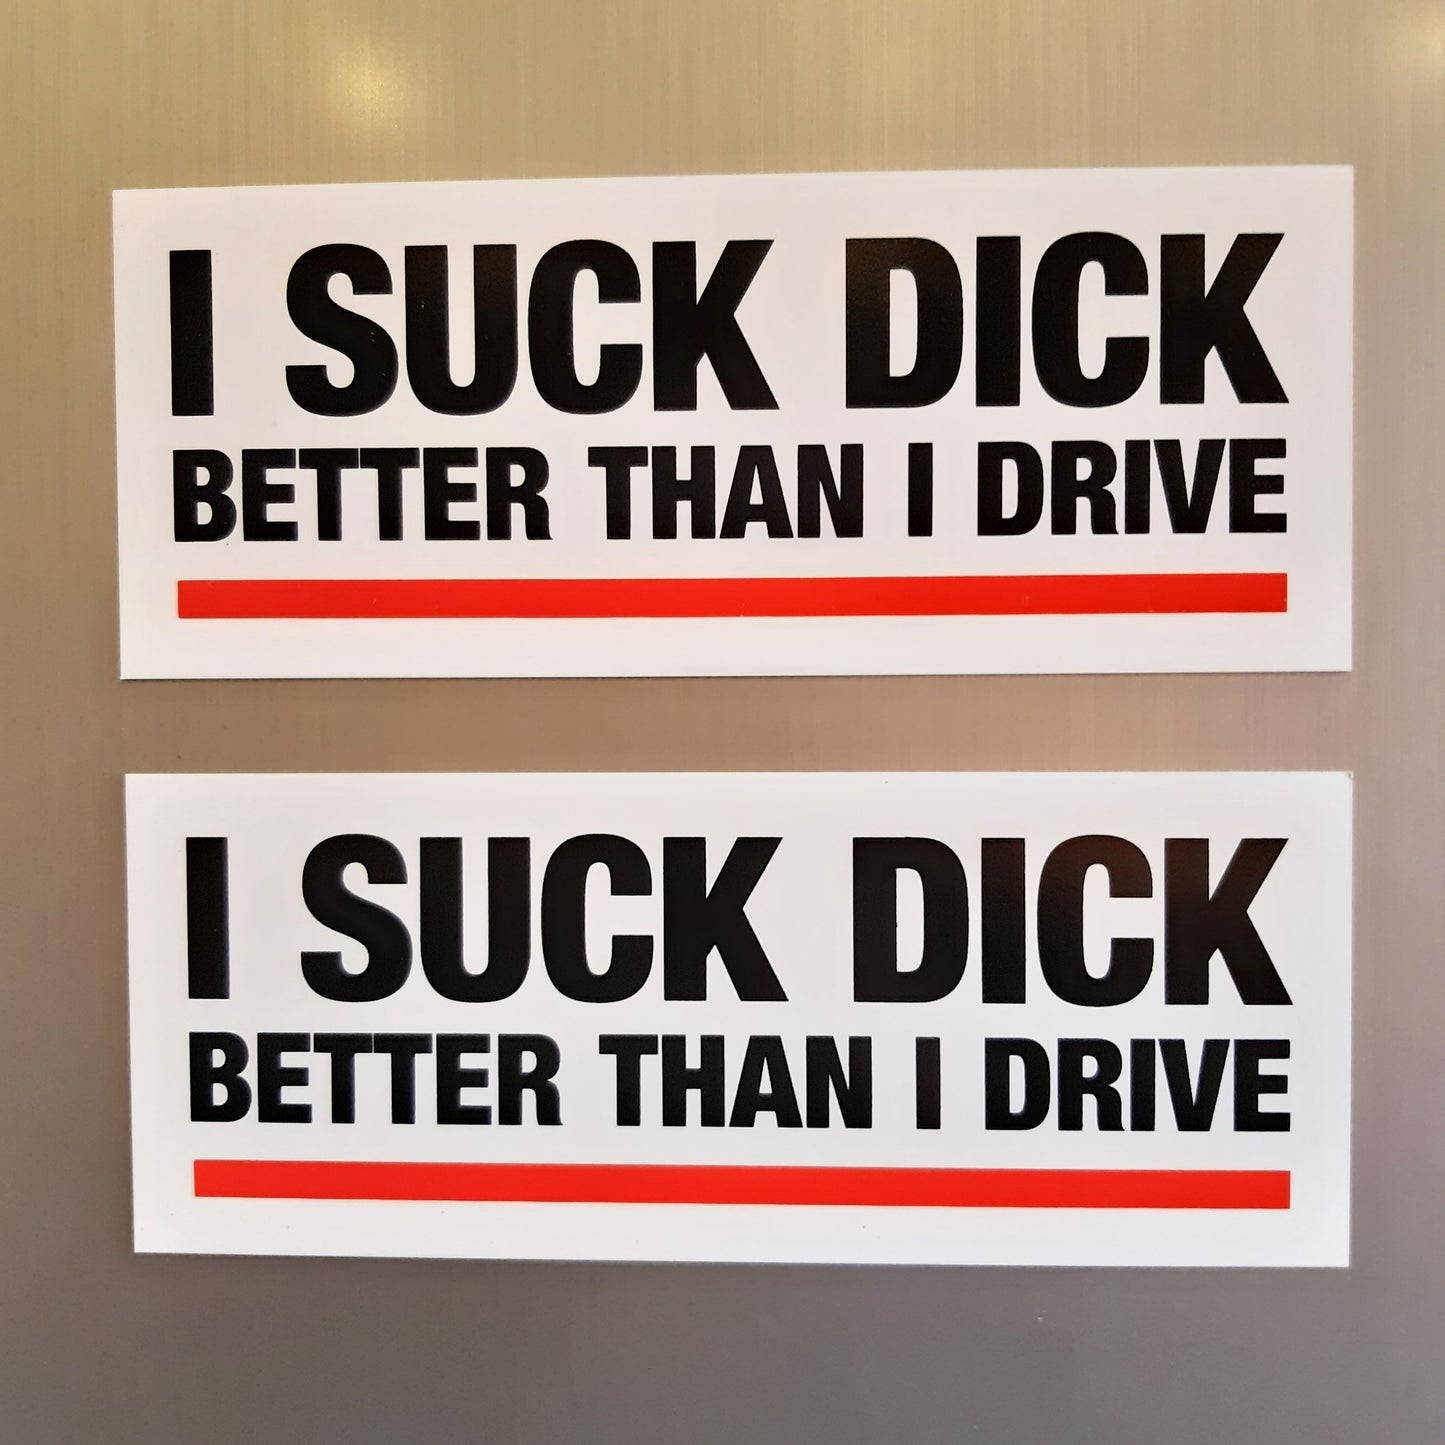 2 Joke Magnetic Car Stickers With "I SUCK DICK"